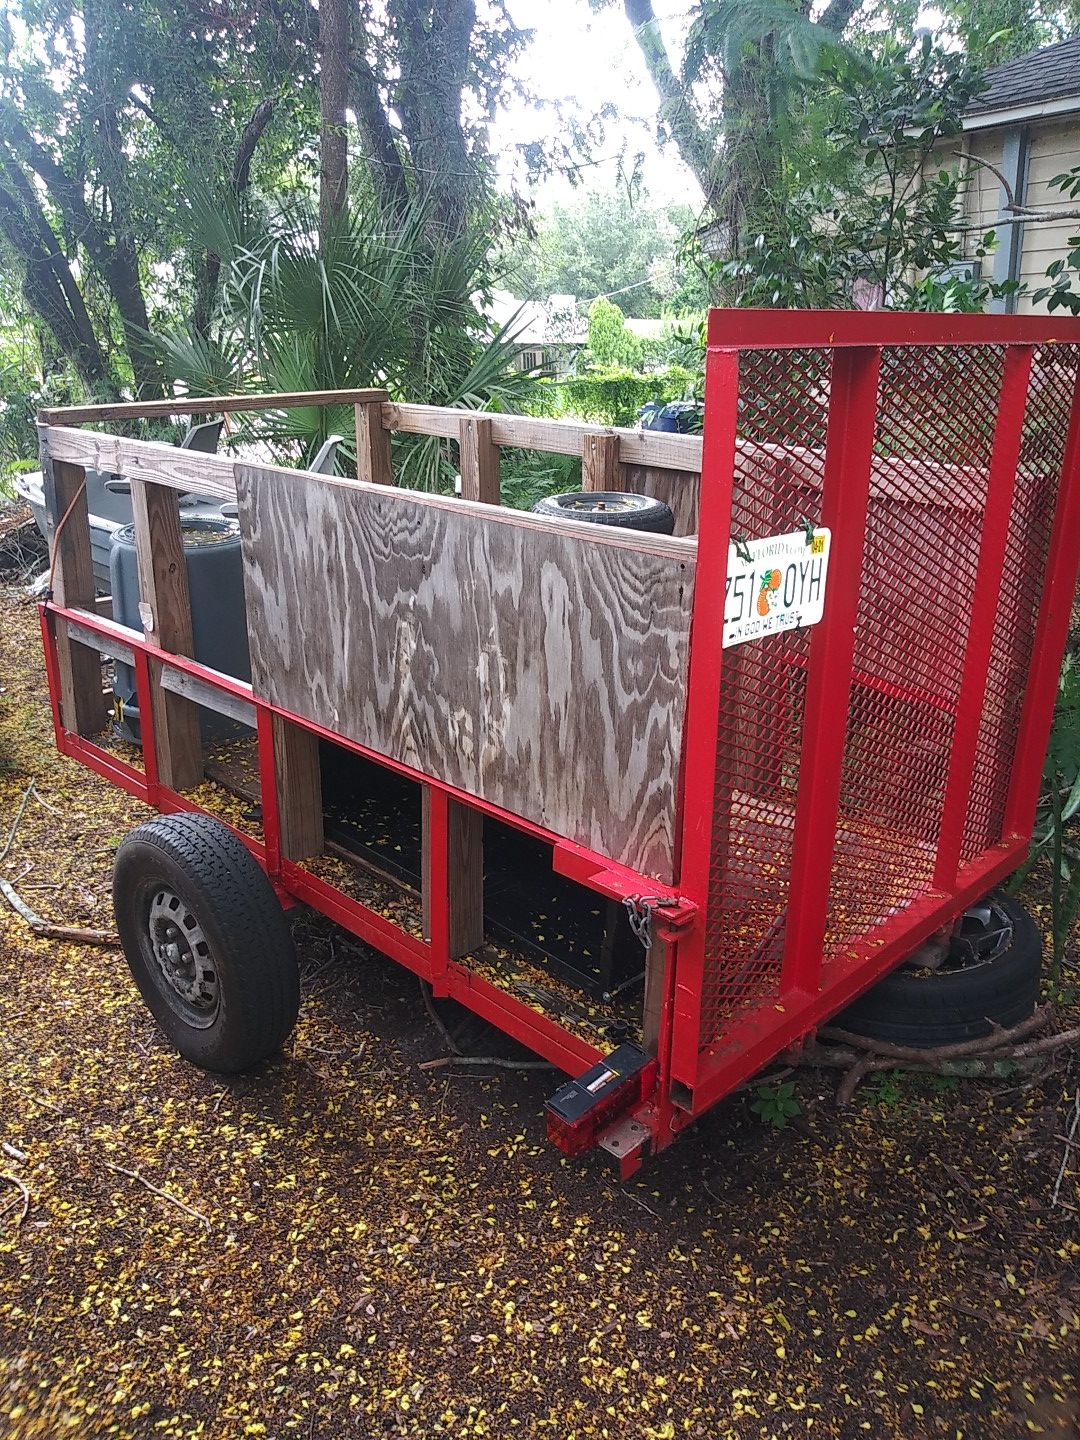 Trailer. With papers and caged ramp